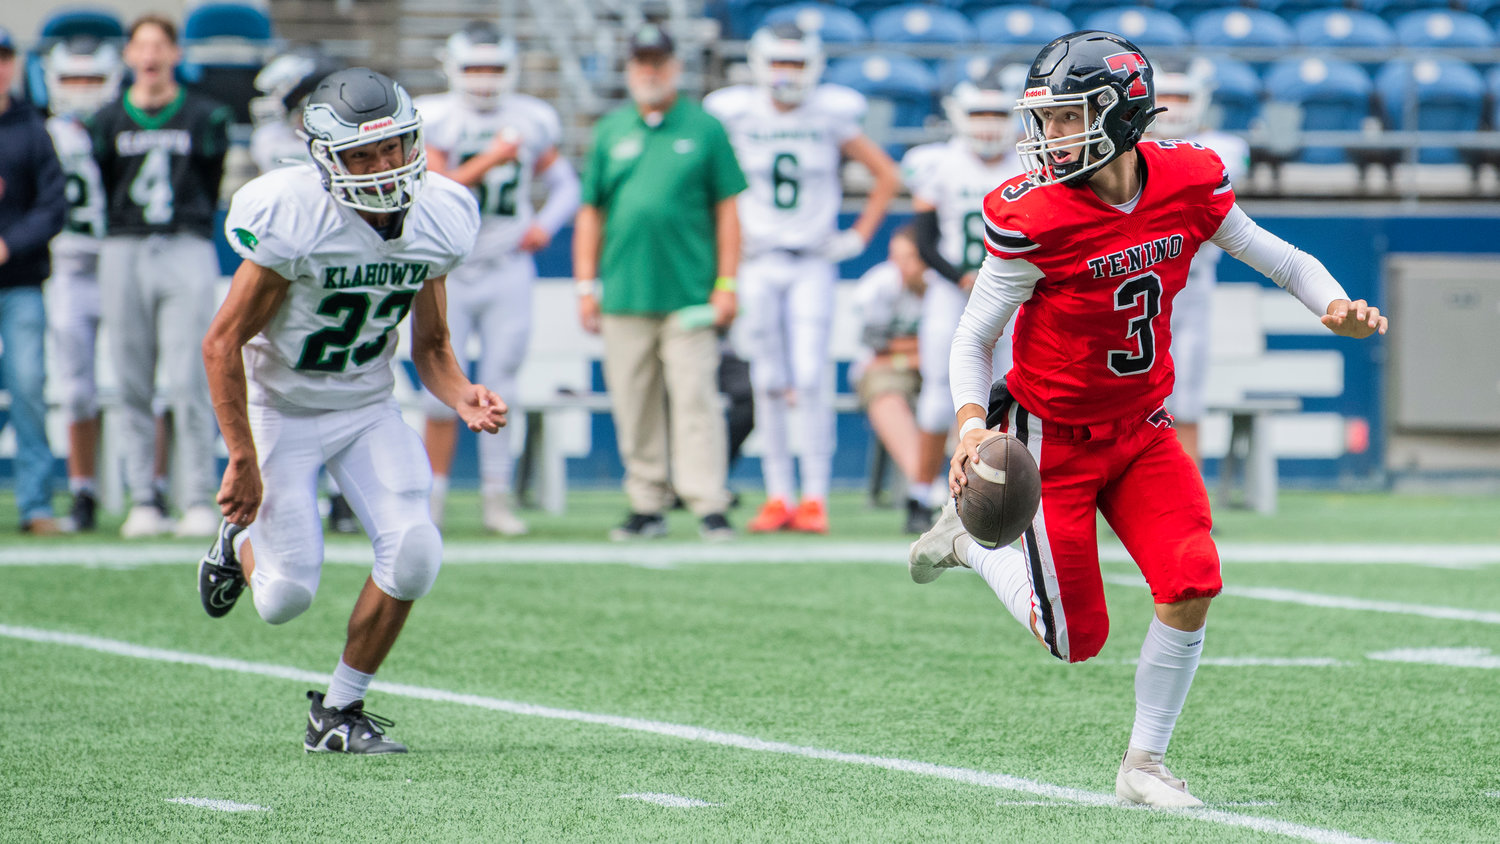 Tenino quarterback Cody Strawn (3) scrambles out of the pocket while looking to pass Saturday afternoon at Lumen Field in Seattle.